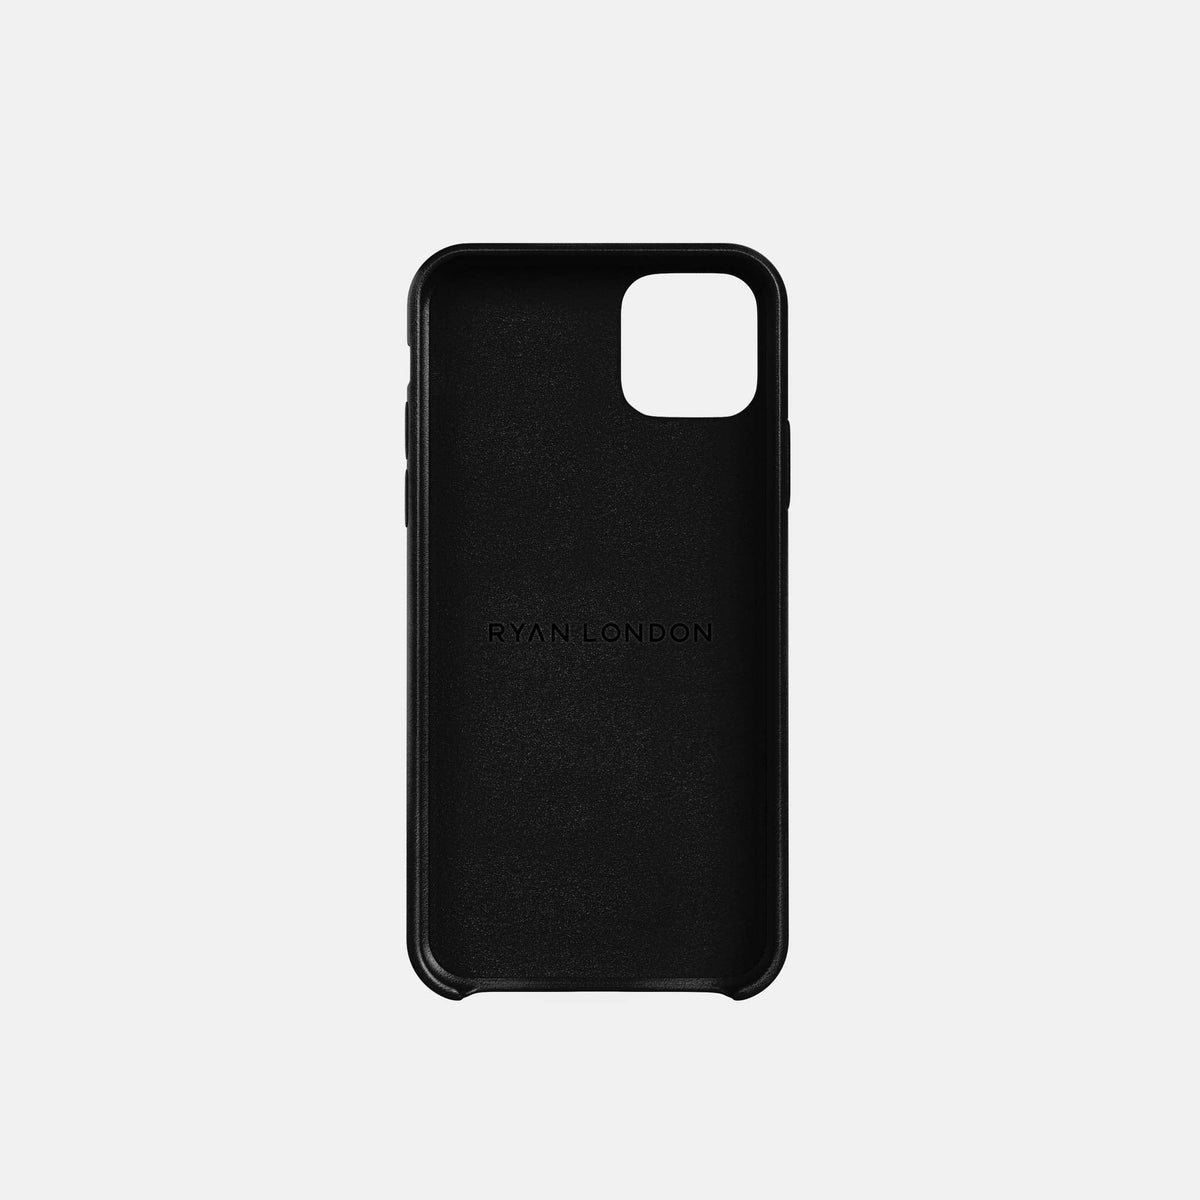 Leather iPhone Xs Max Shell Case - Black - RYAN London